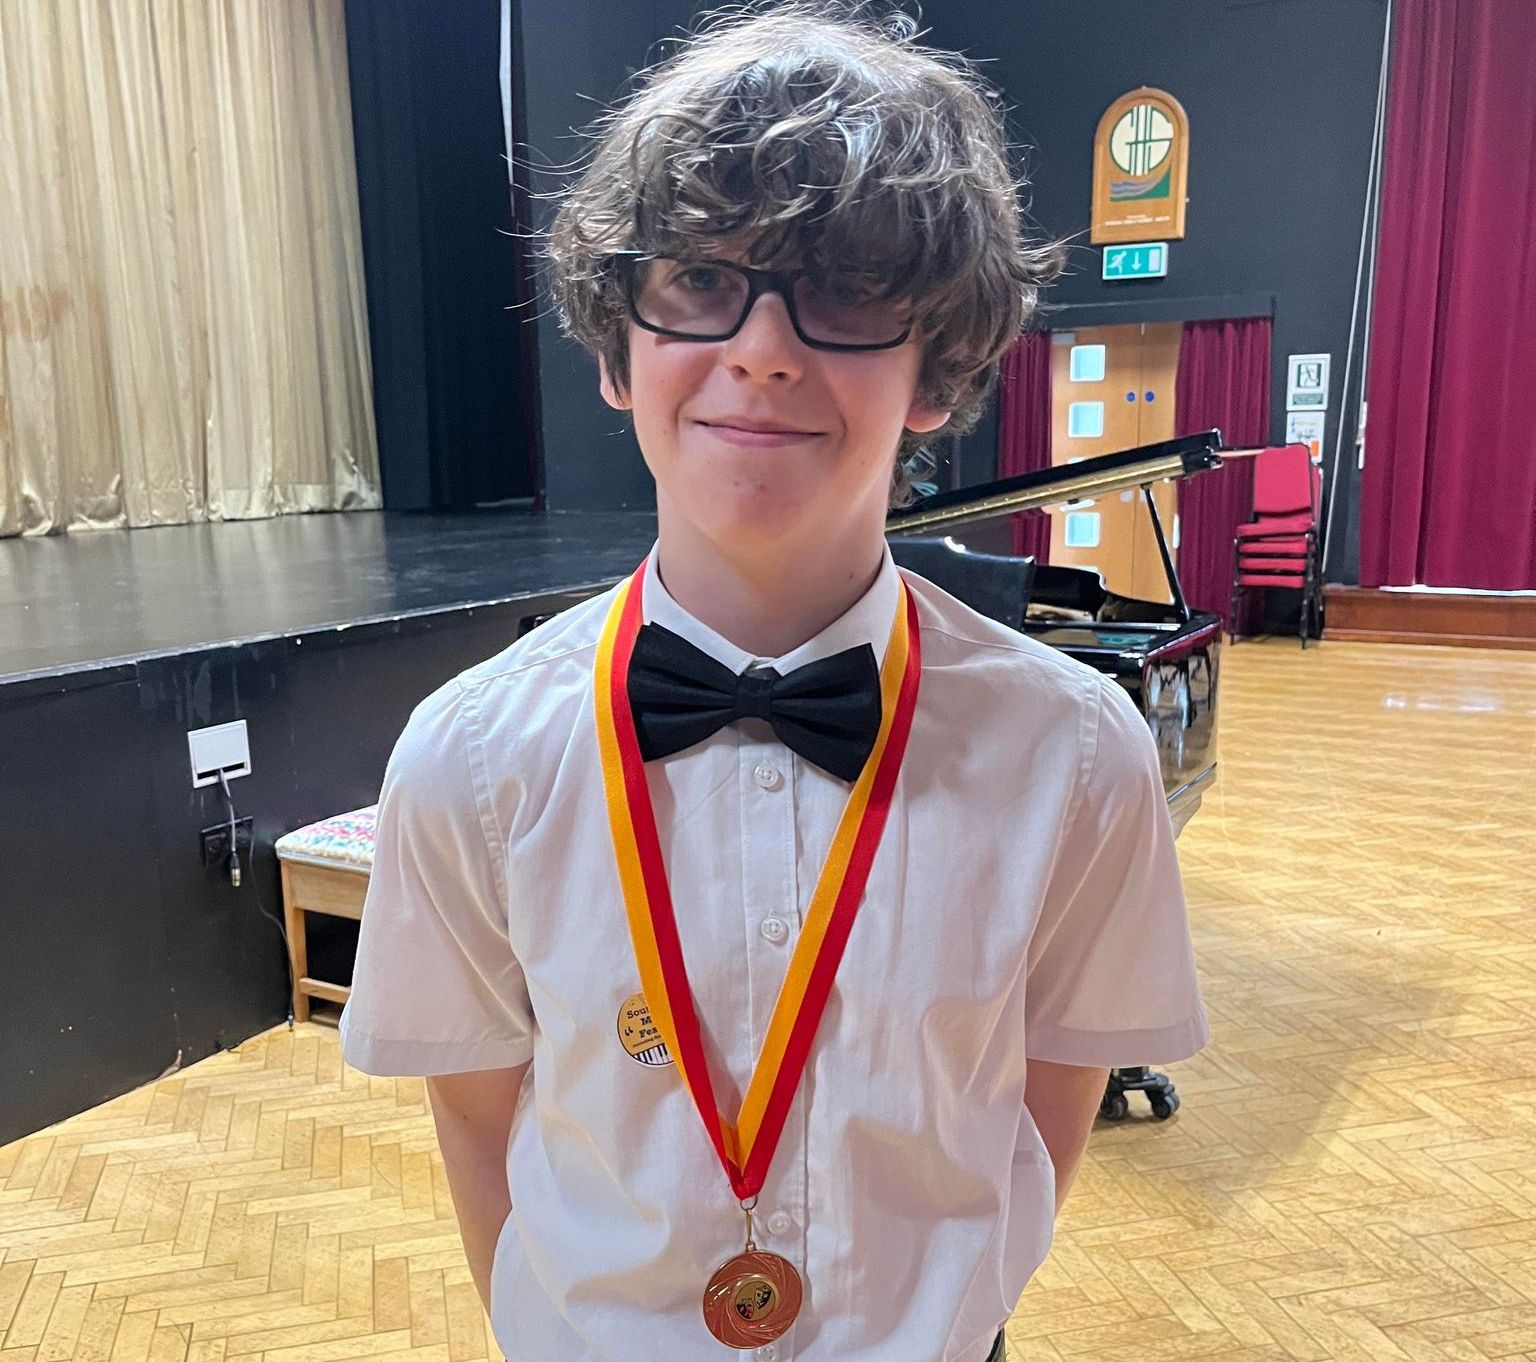 Southport Piano Academy won four first places in the piano solos at the Southport Music Festival